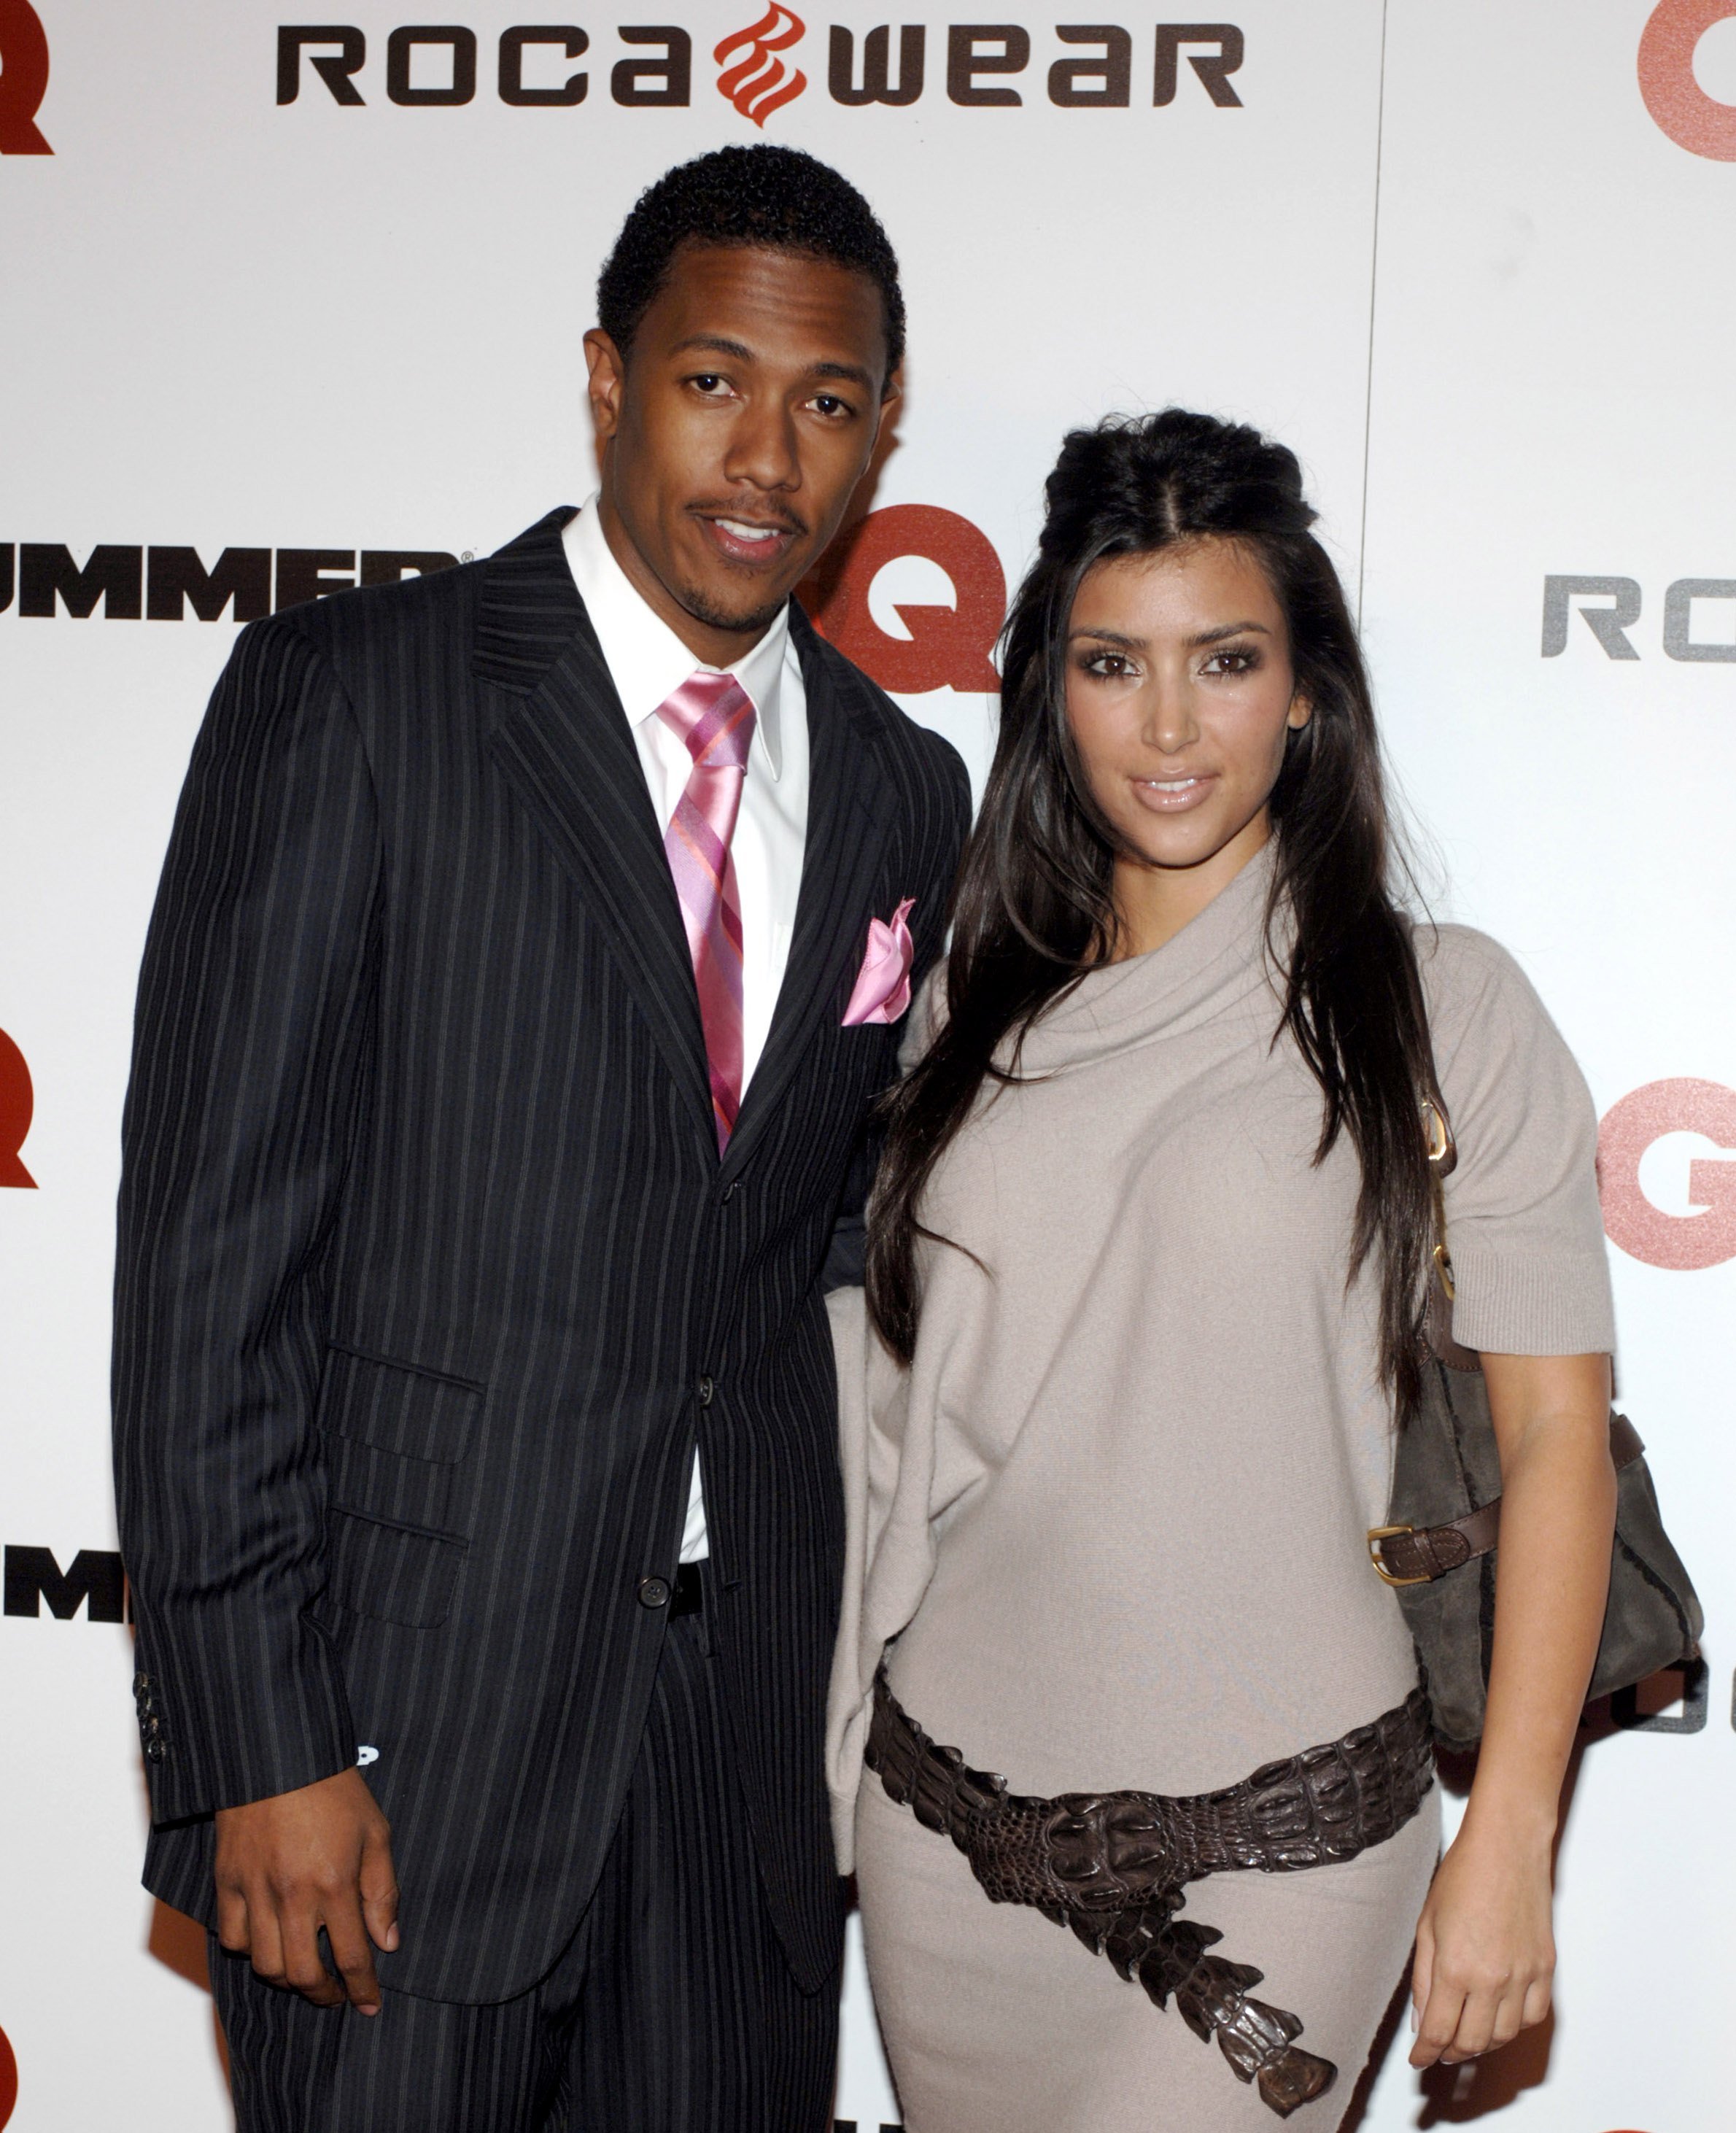 Nick Cannon and Kim Kardashian attend a party for Shawn "Jay-Z" Carter's release of his newest album "Kingdom Come" on November 21, 2006 in Los Angeles, California | Photo: Getty Images